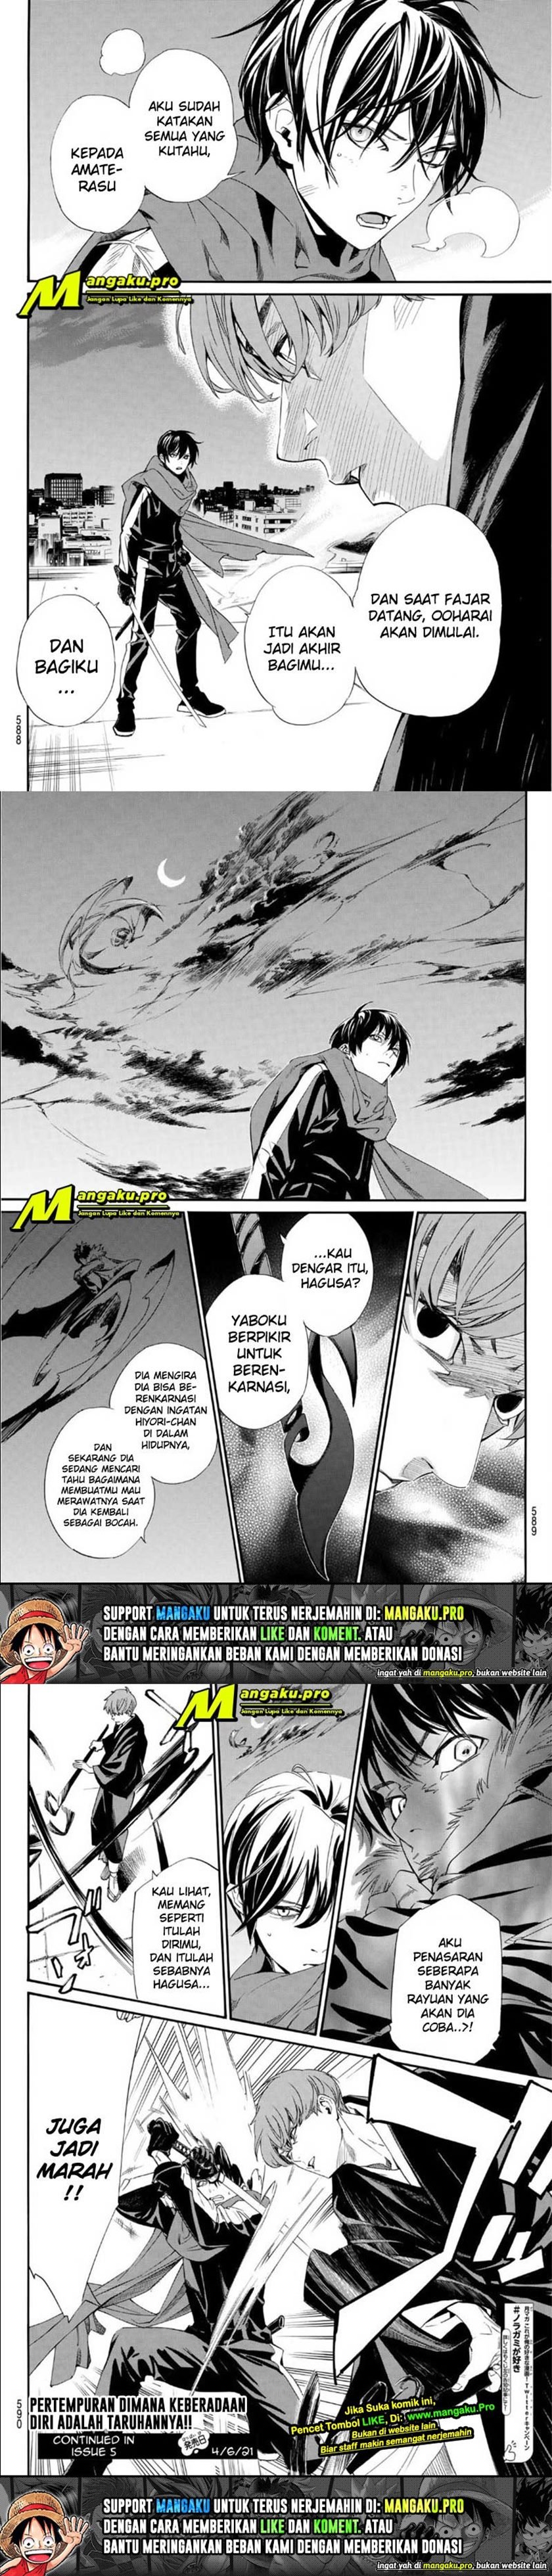 Noragami Chapter 93